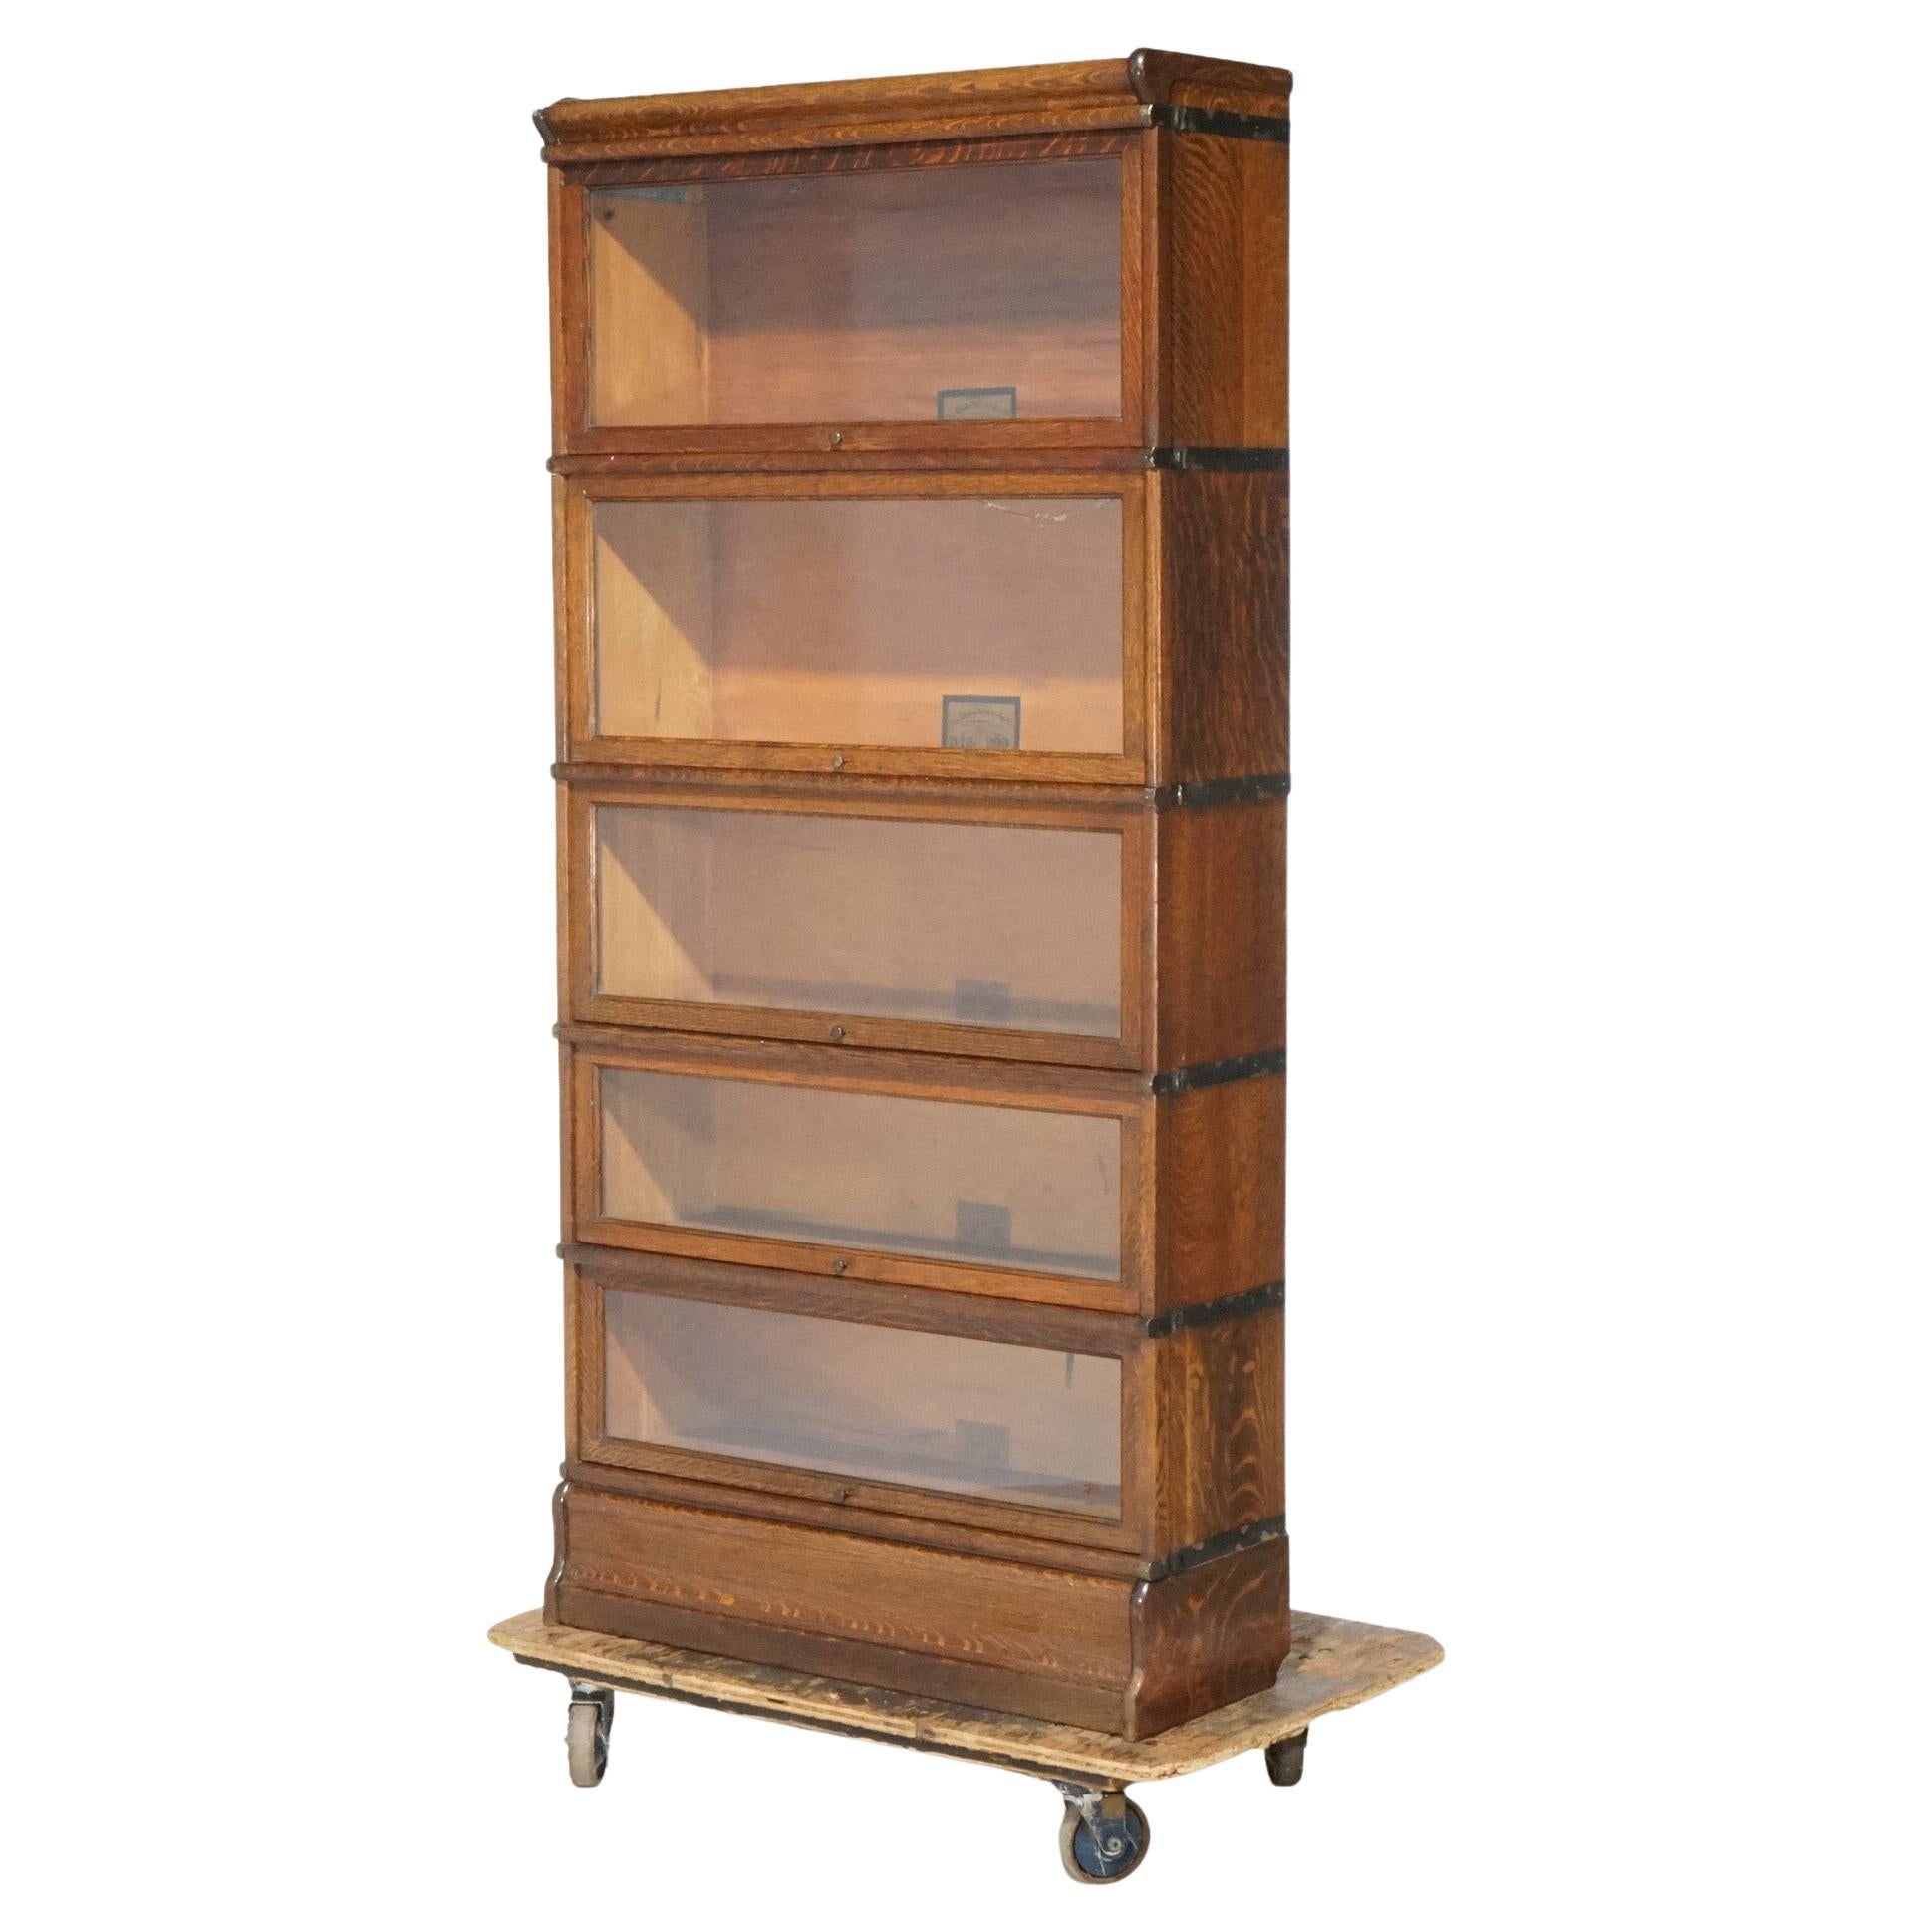 An antique Arts and Crafts Mission barrister bookcase by Globe Wernicke offers quarter sawn oak construction with five stacks, each having pull out glass doors, and raised on ogee base; maker labels as photographed; c1910

Measures - 72